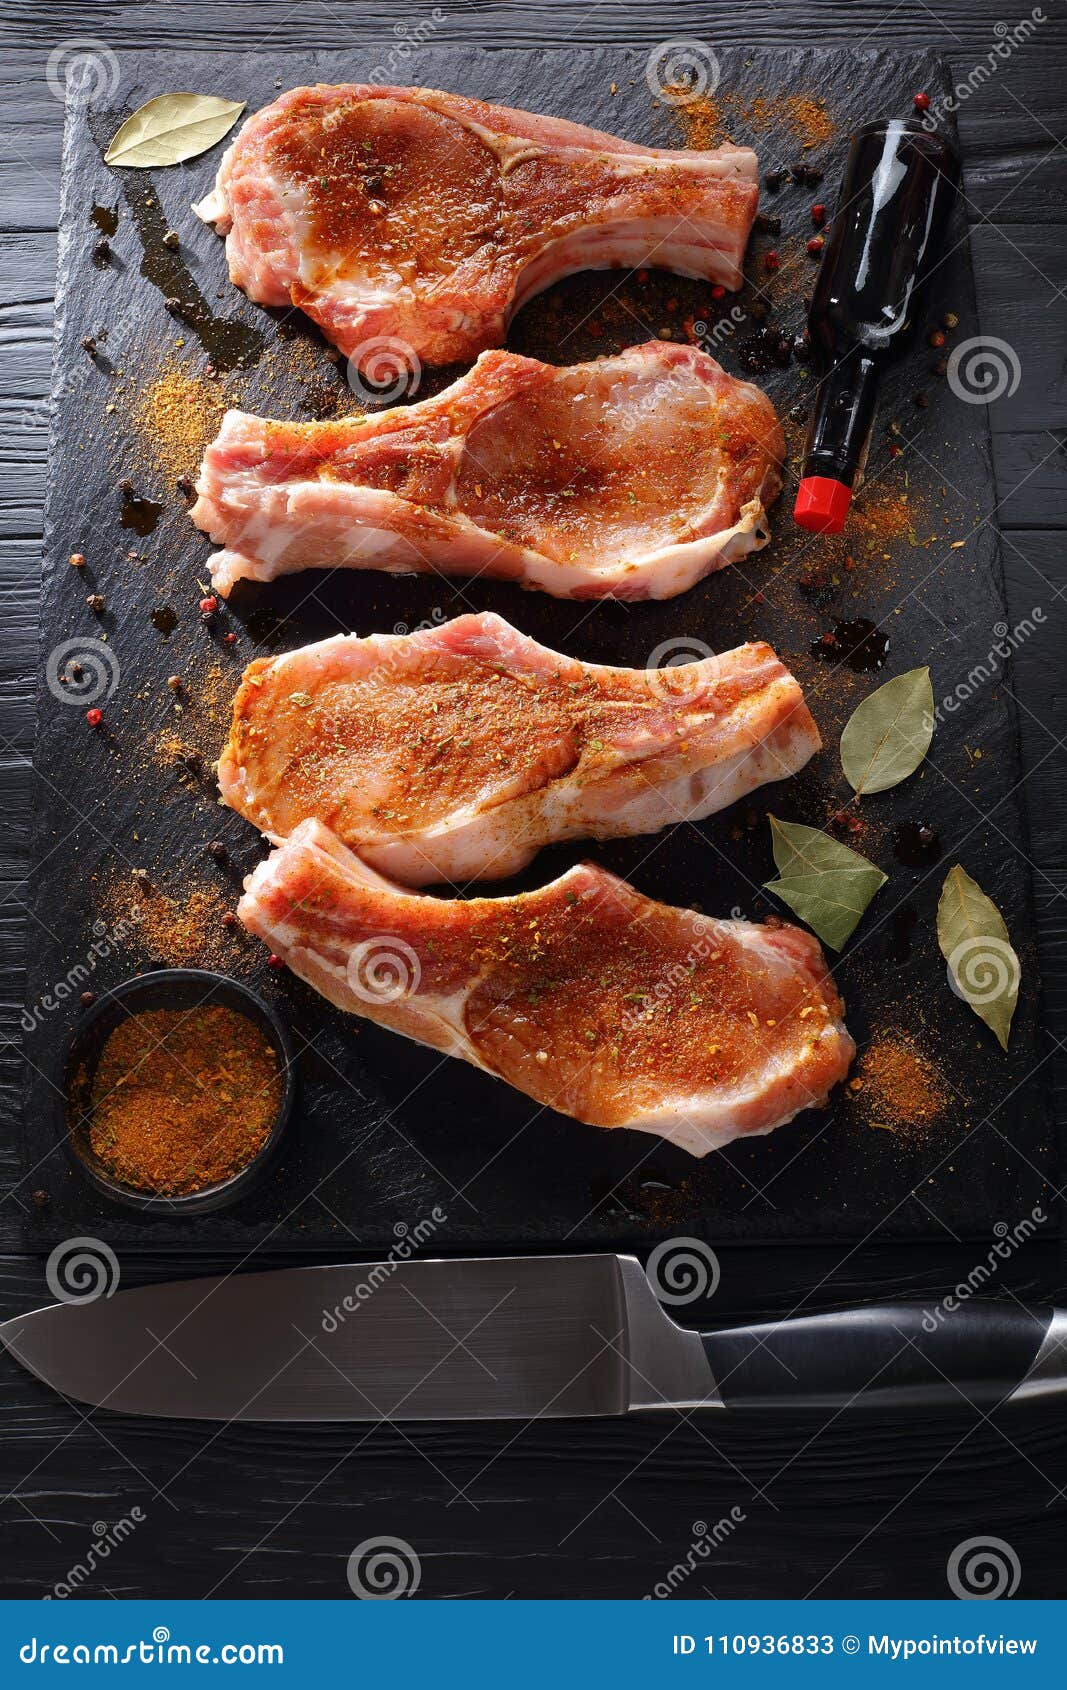 Raw Chopped Pork Seasoned with Spices Stock Image - Image of chop ...